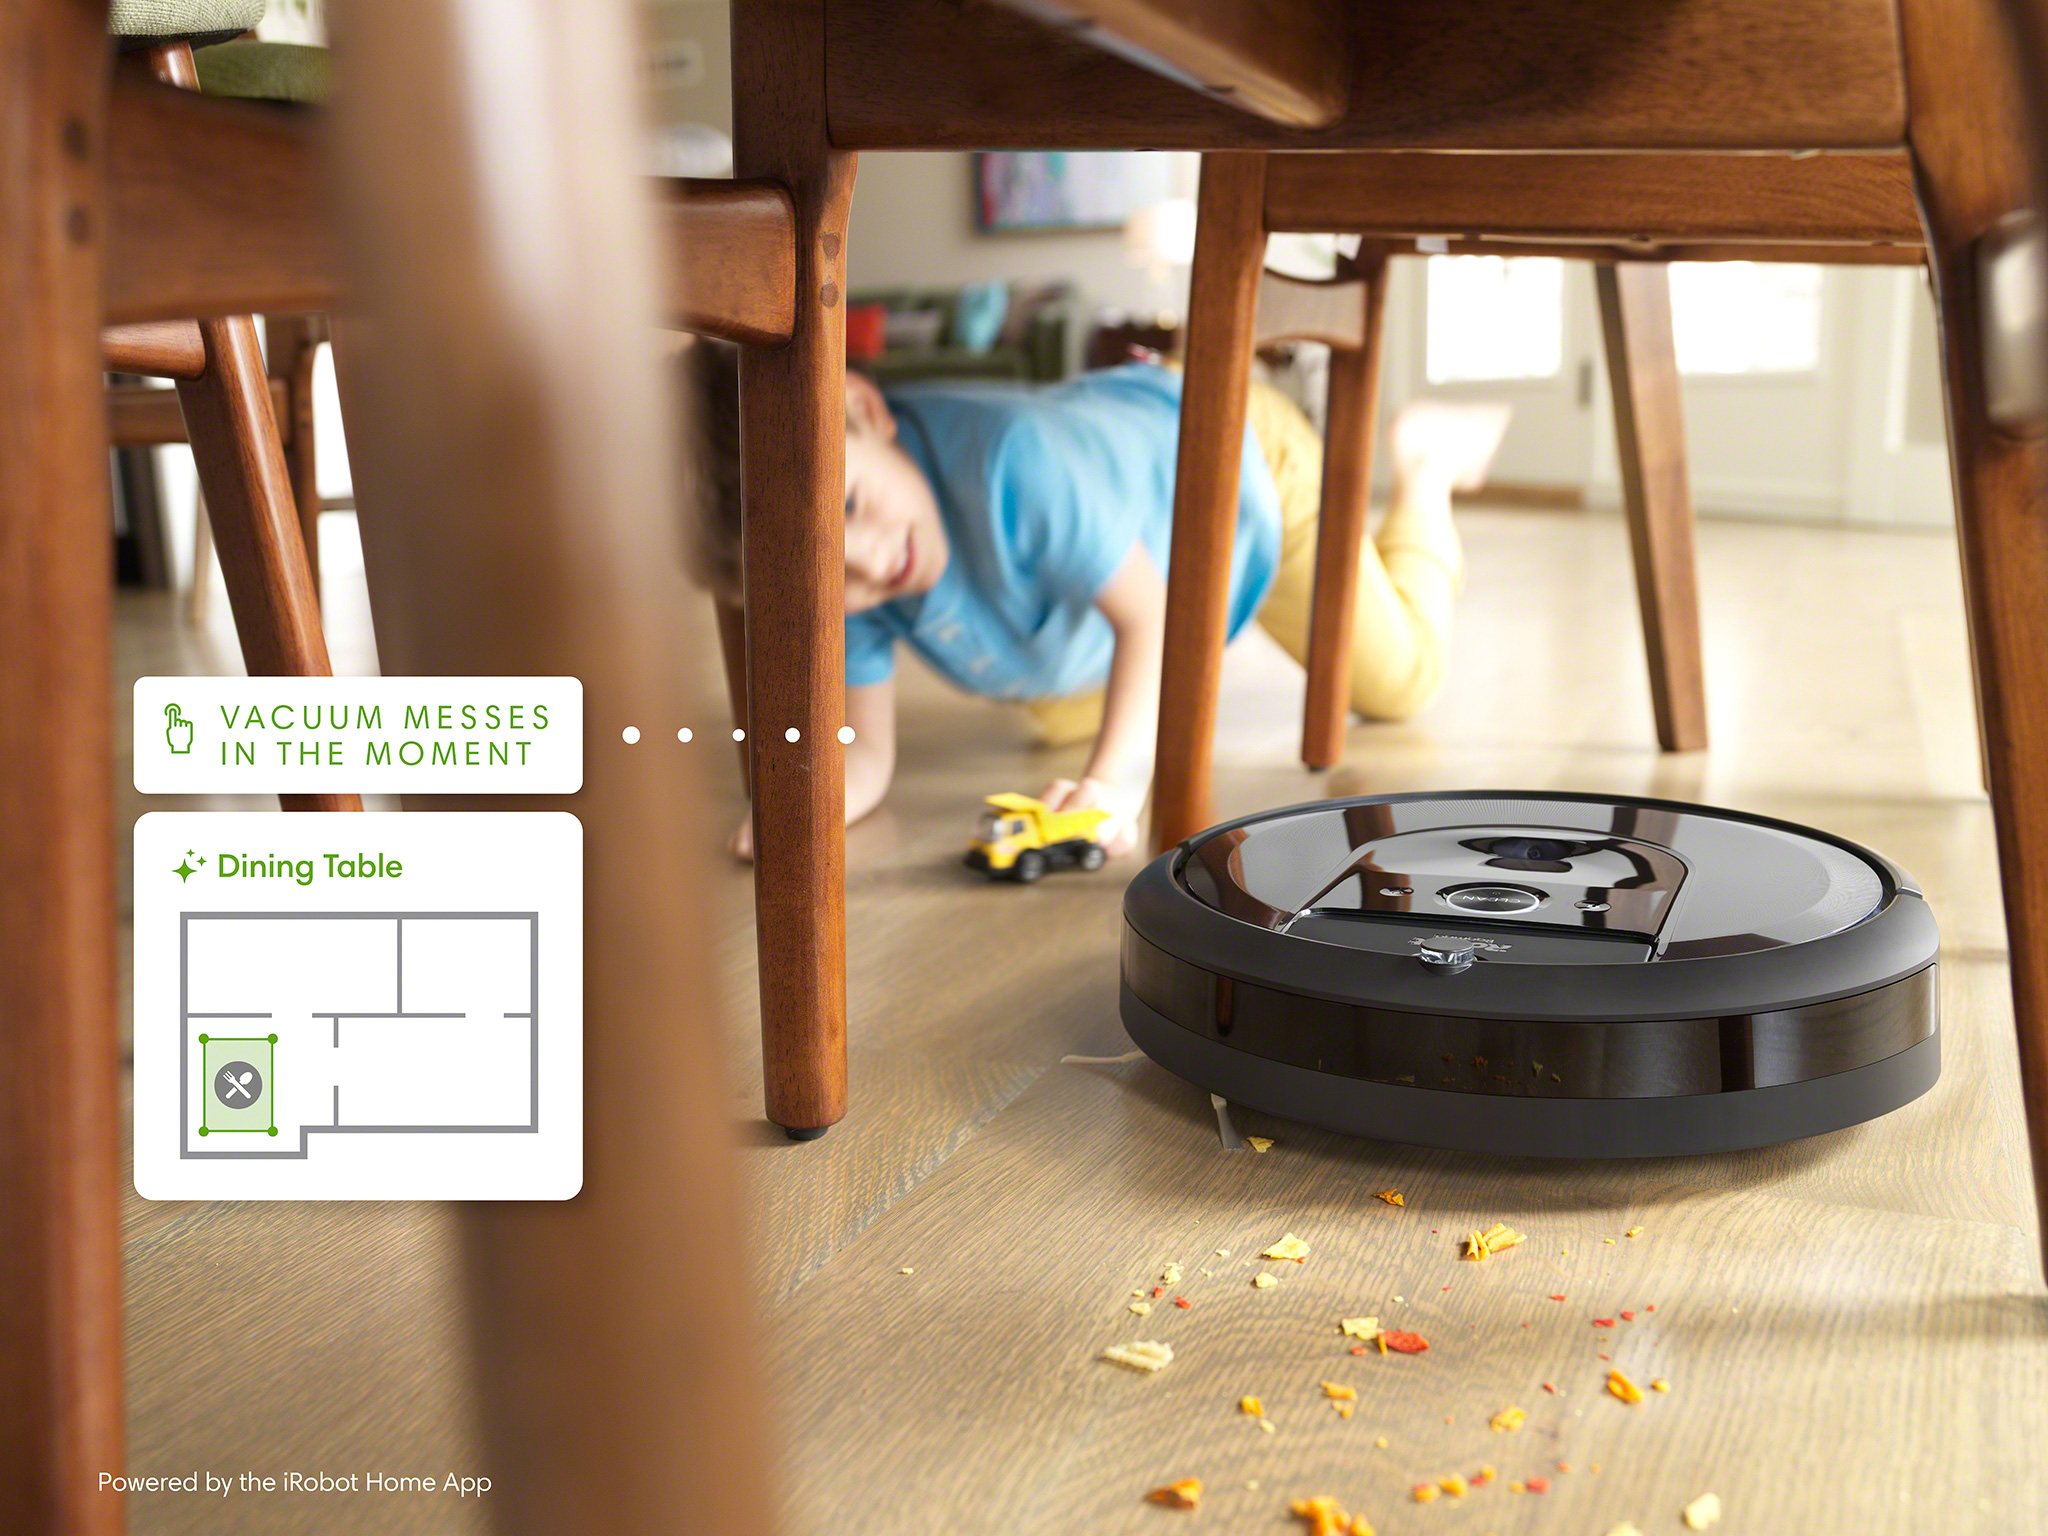 Send your Roomba robot vacuum or Braava jet robot mop to clean a mess right where it happens with precision Clean Zones. Roomba robot vacuums and Braava robot mops with Imprint™ Smart Mapping can automatically detect and proactively suggest Clean Zones around specific objects, like tables.